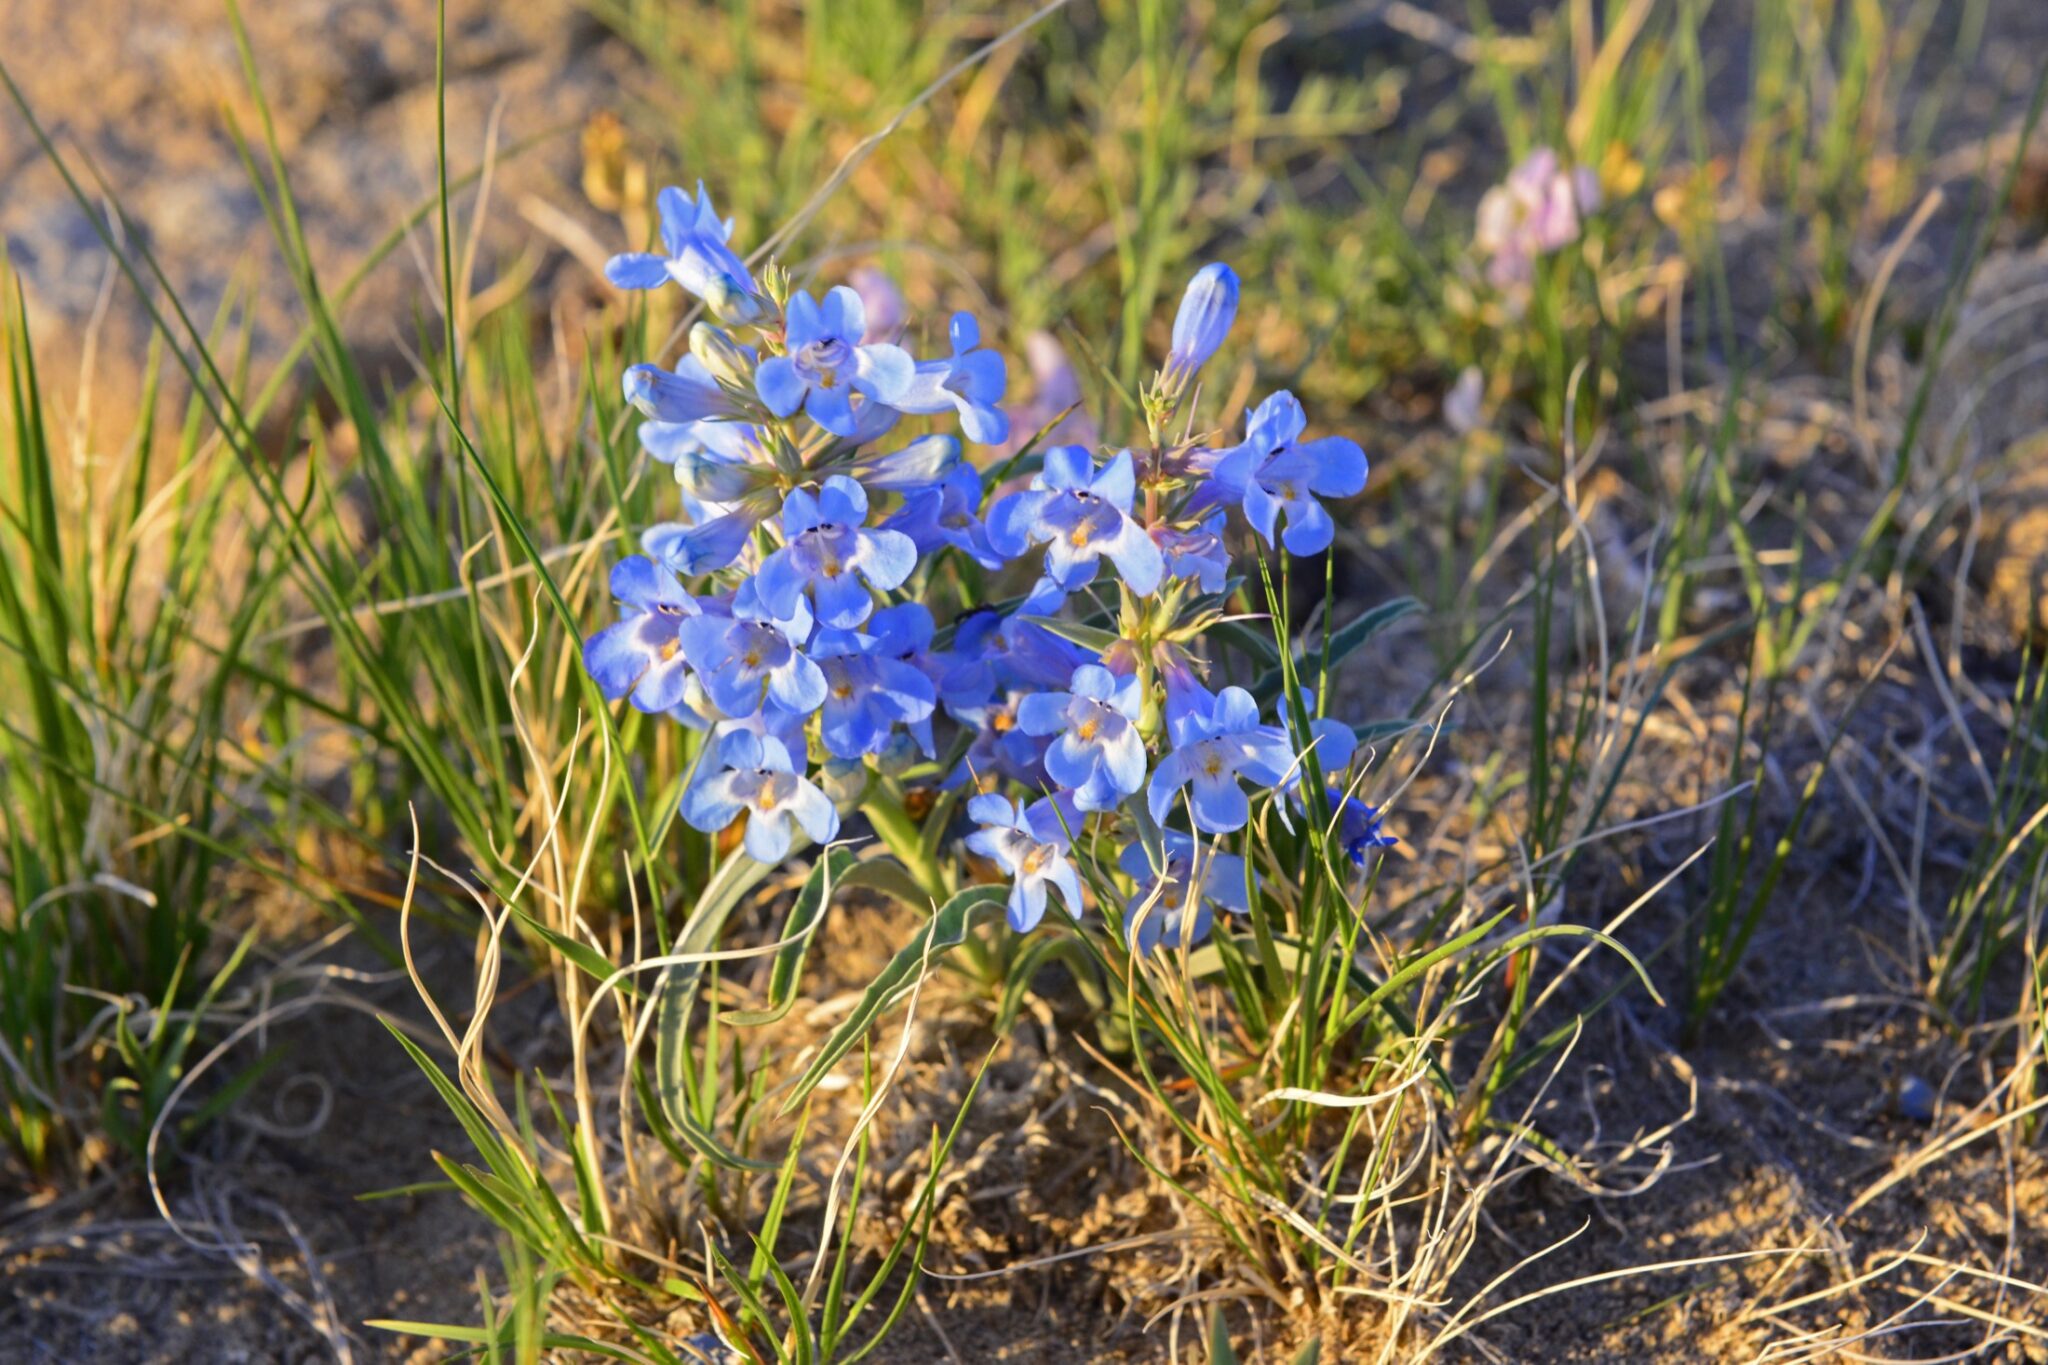 Blue flowers growing from grass